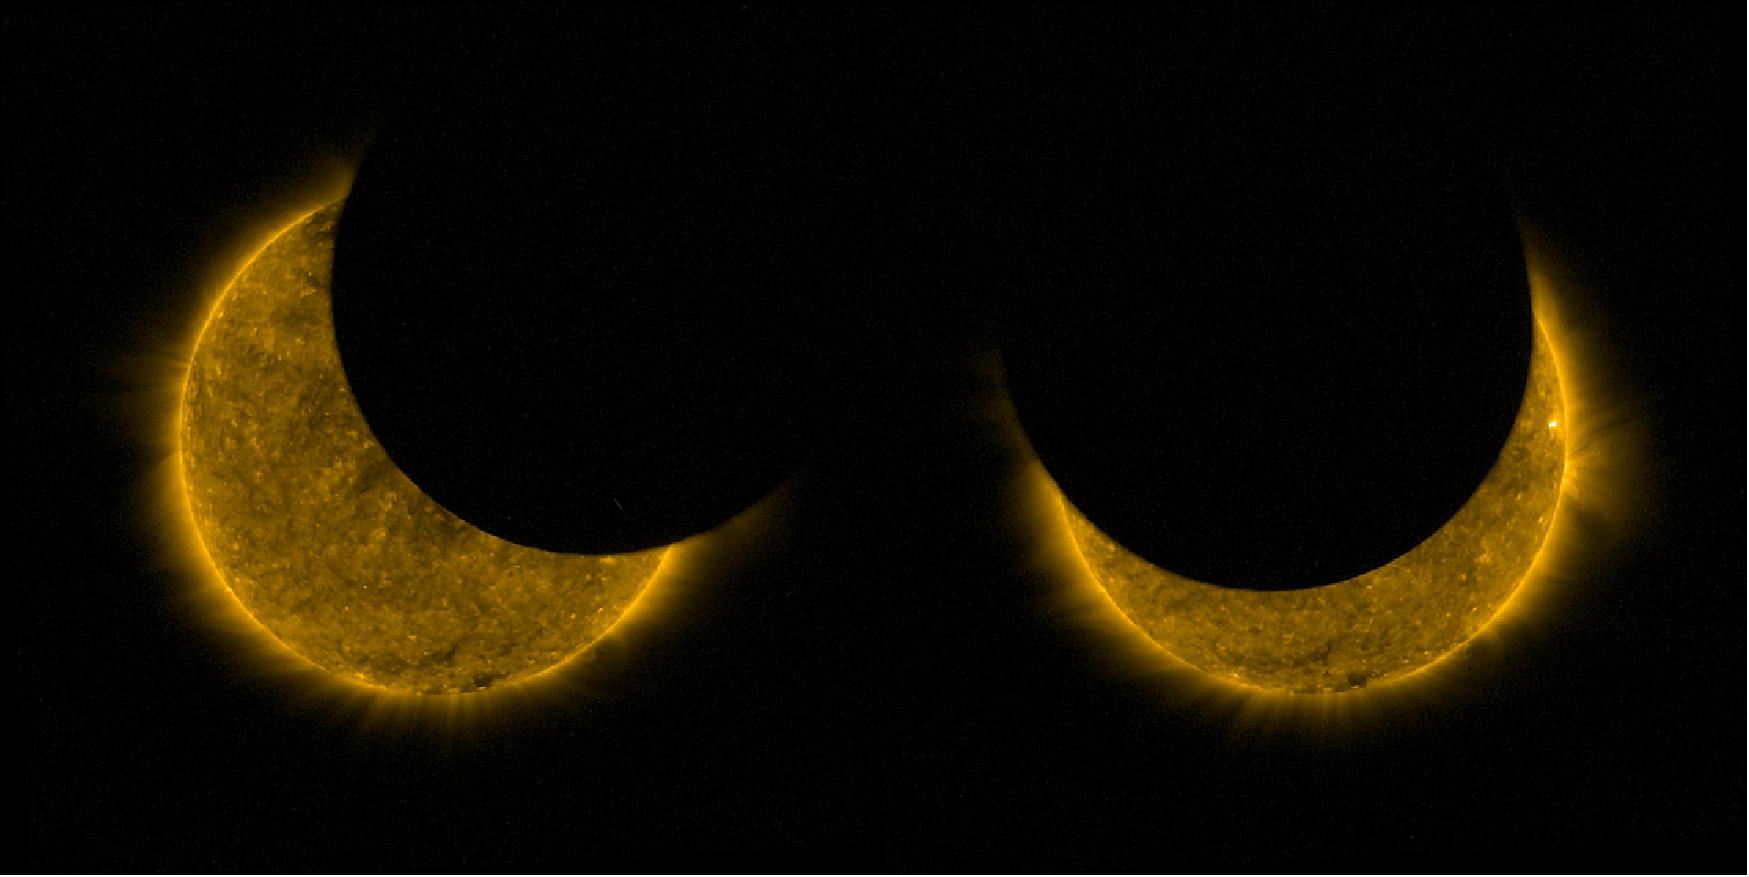 Figure 23: Selected views of the two partial eclipses are seen side-by-side here – the first (left) was captured at 08:40:12 GMT and the second (right) at 10:32:17 GMT on 11 August (image credit: ESA/Royal Observatory of Belgium)